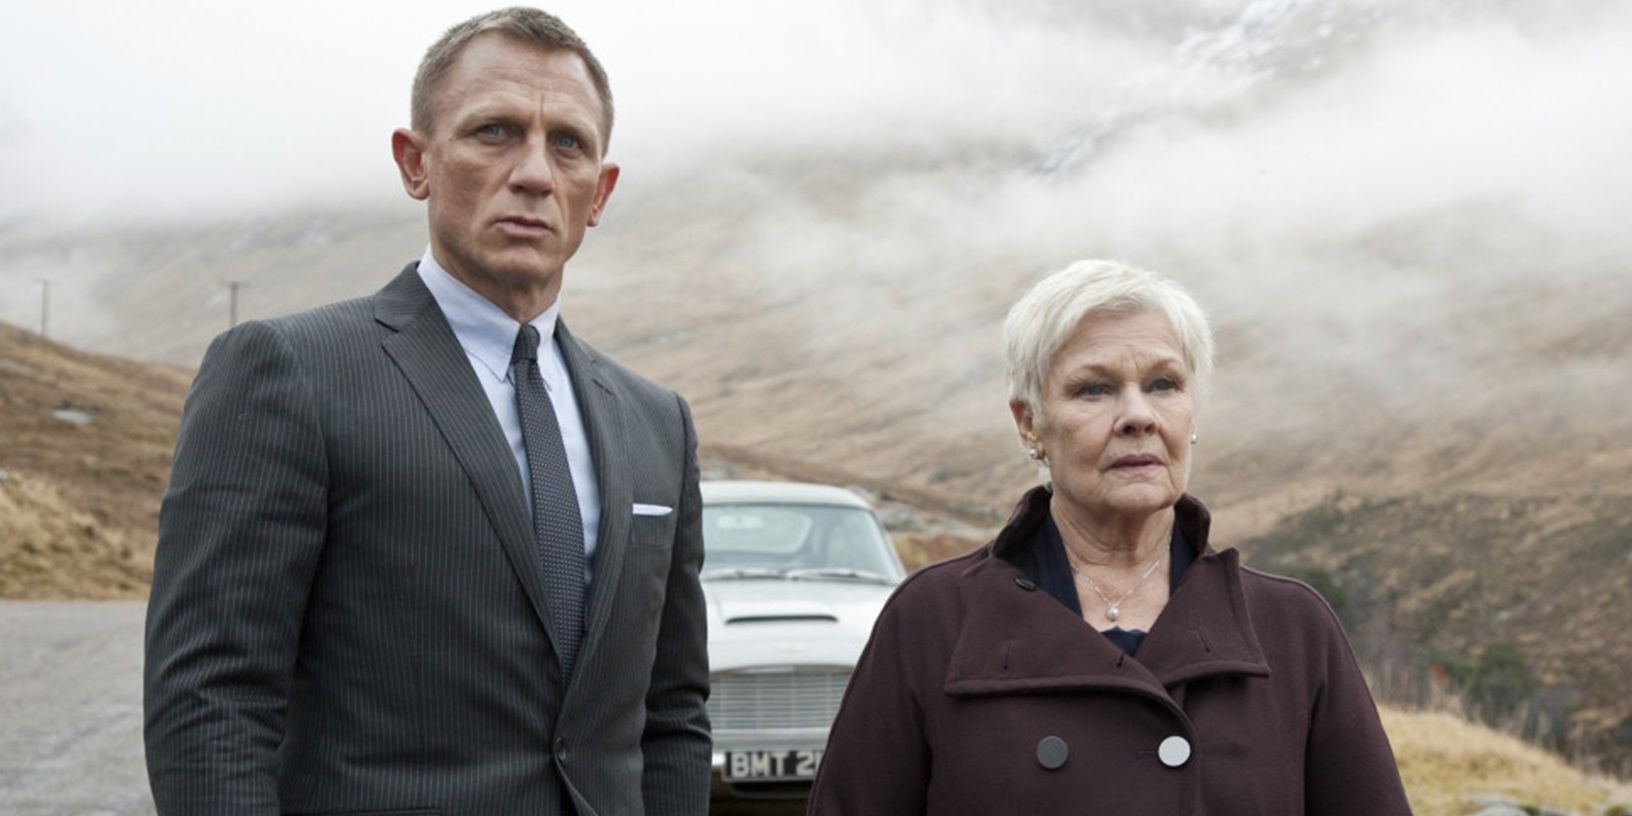 Bond and M in the countryside in Skyfall